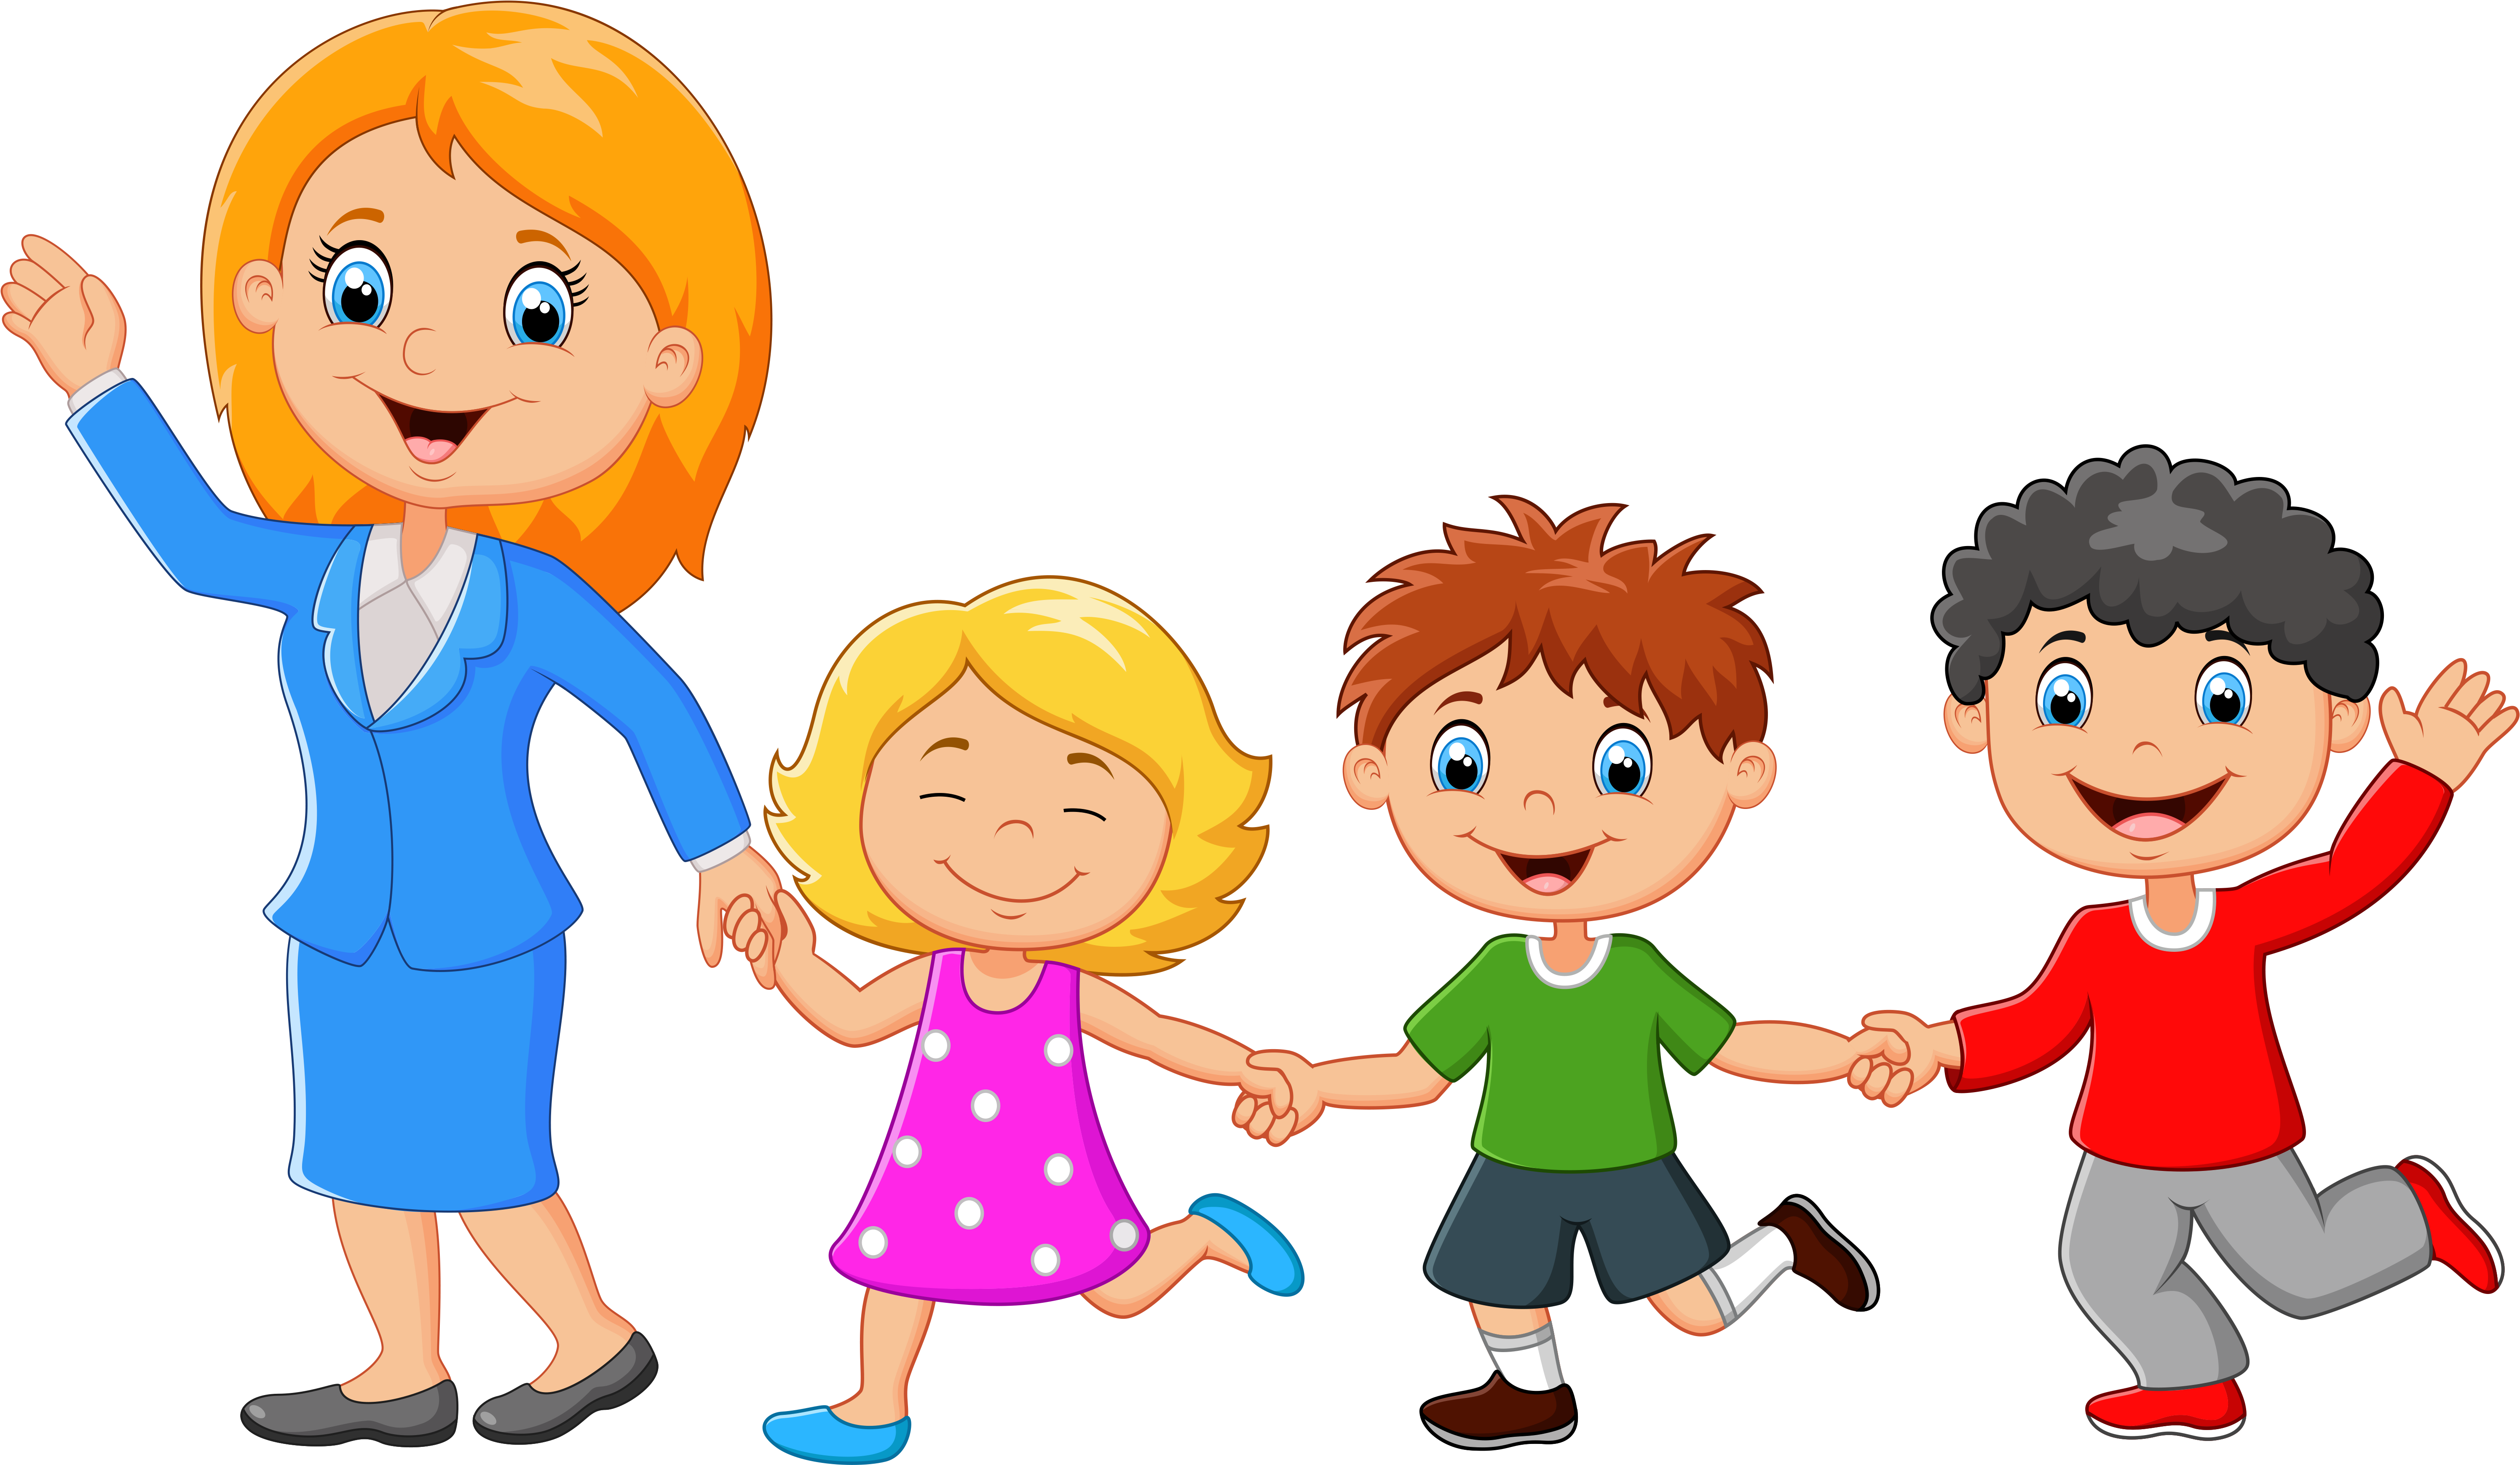 A Cartoon Of A Woman And Children Holding Hands